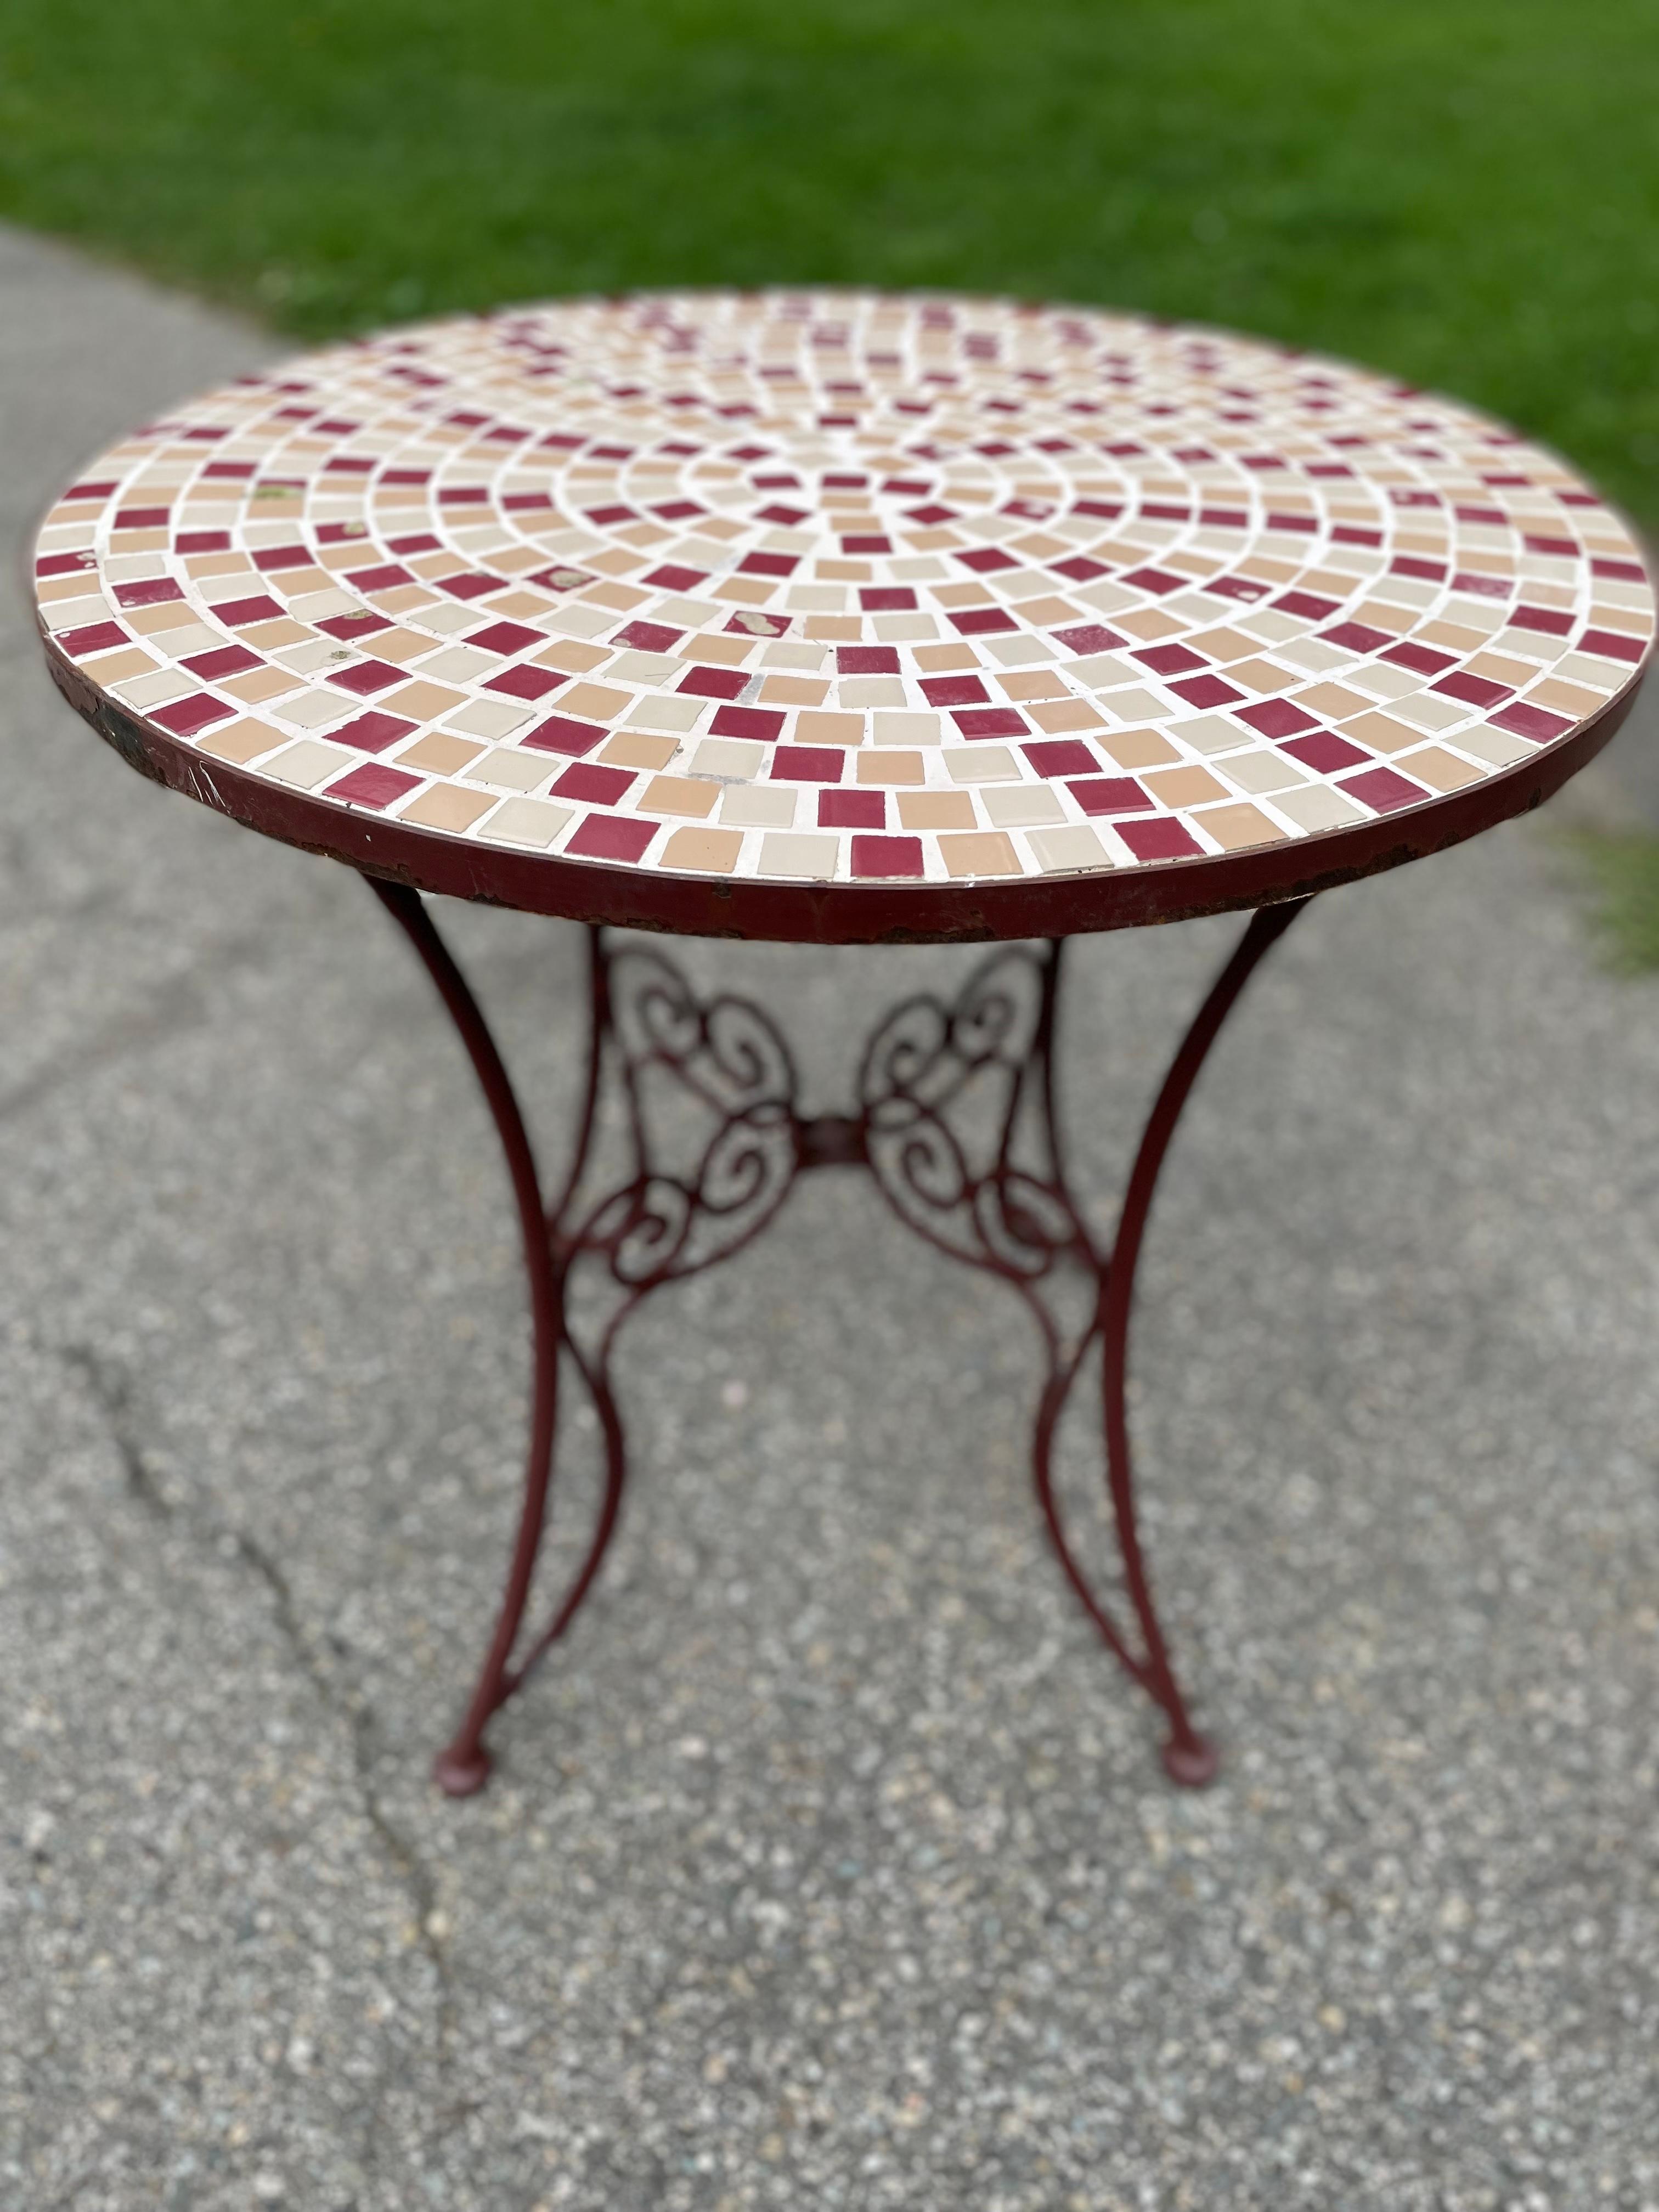 Vintage Mosaic a Tile Top Table In Good Condition For Sale In Cumberland, RI